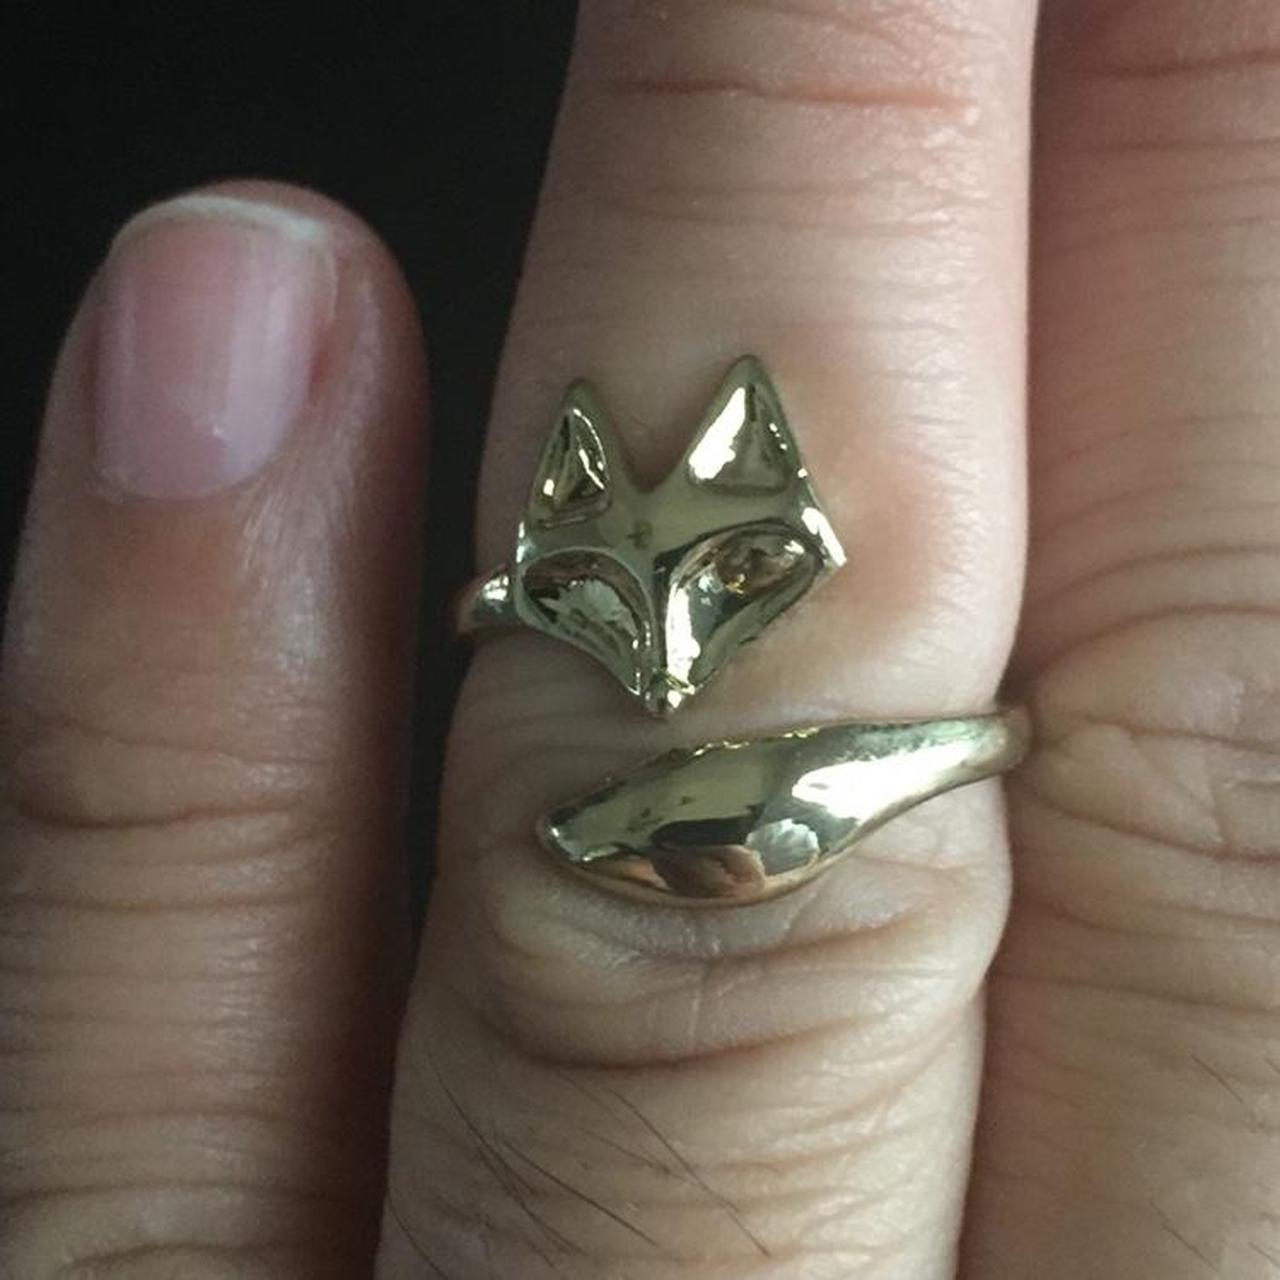 Product Image 2 - Gold fox ring 
Condition: New
Color: